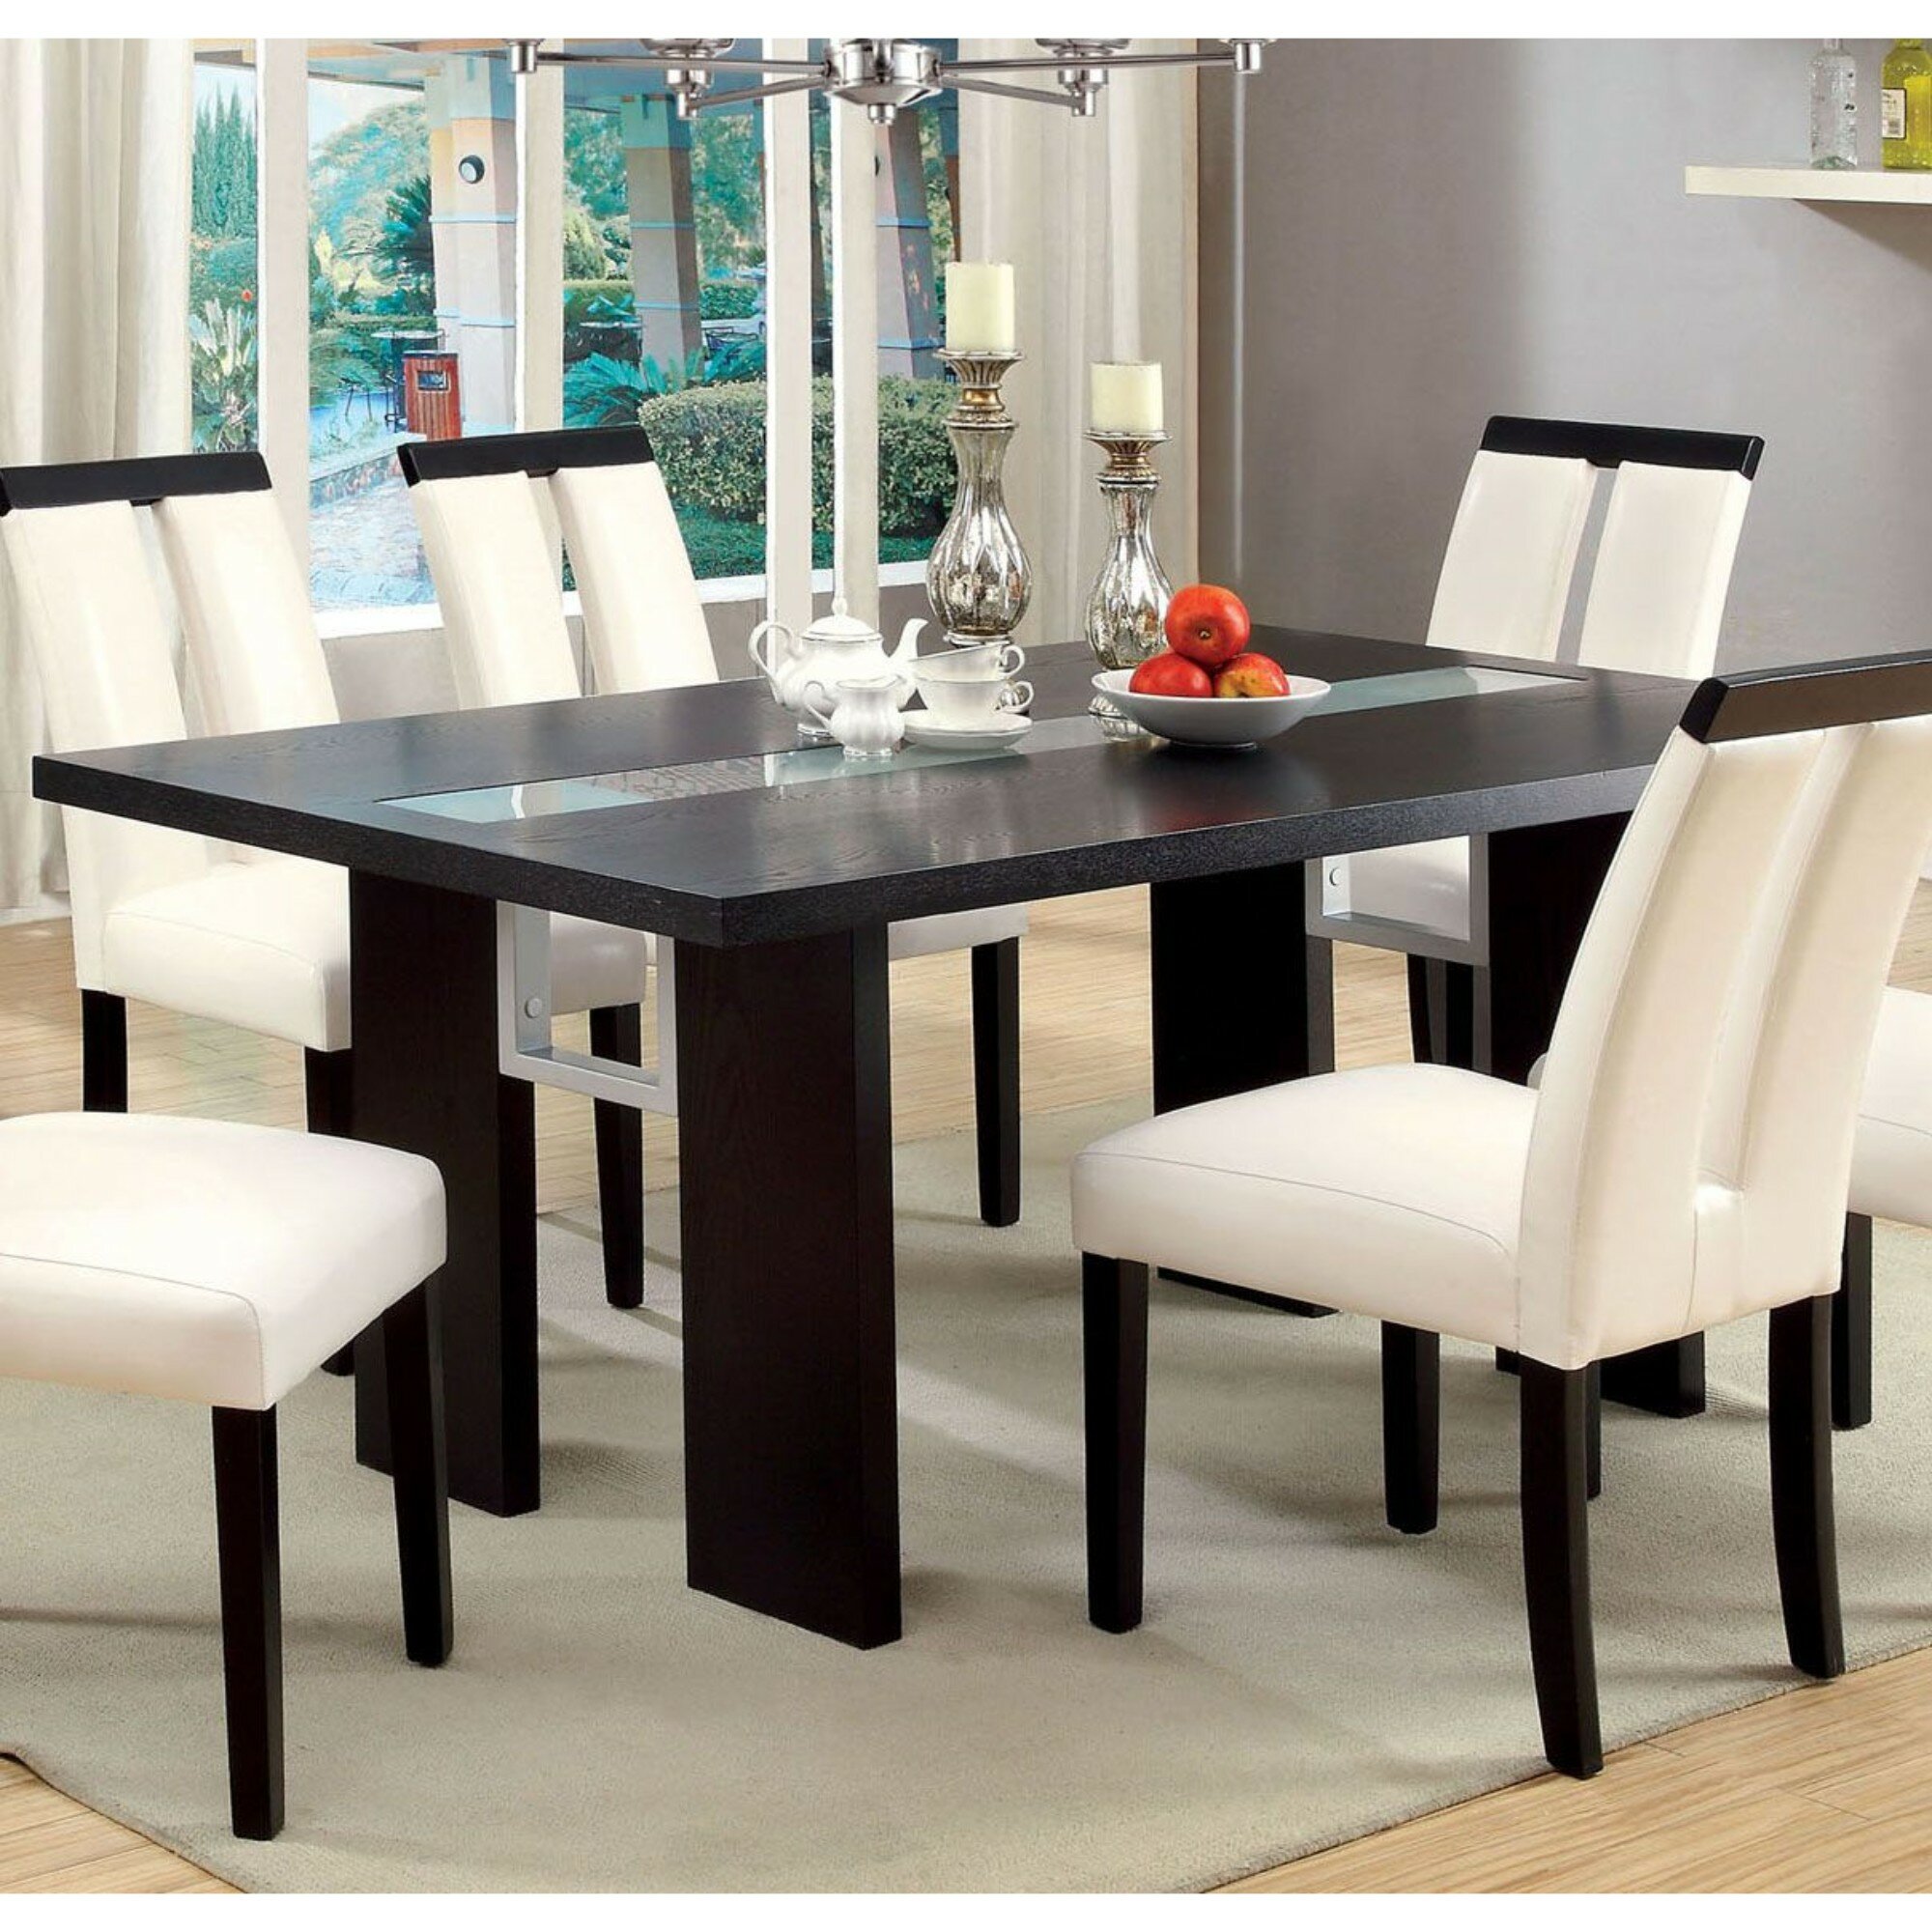 Orren Ellis Greenview Contemporary Glass-Insert Solid Wood Dining Table